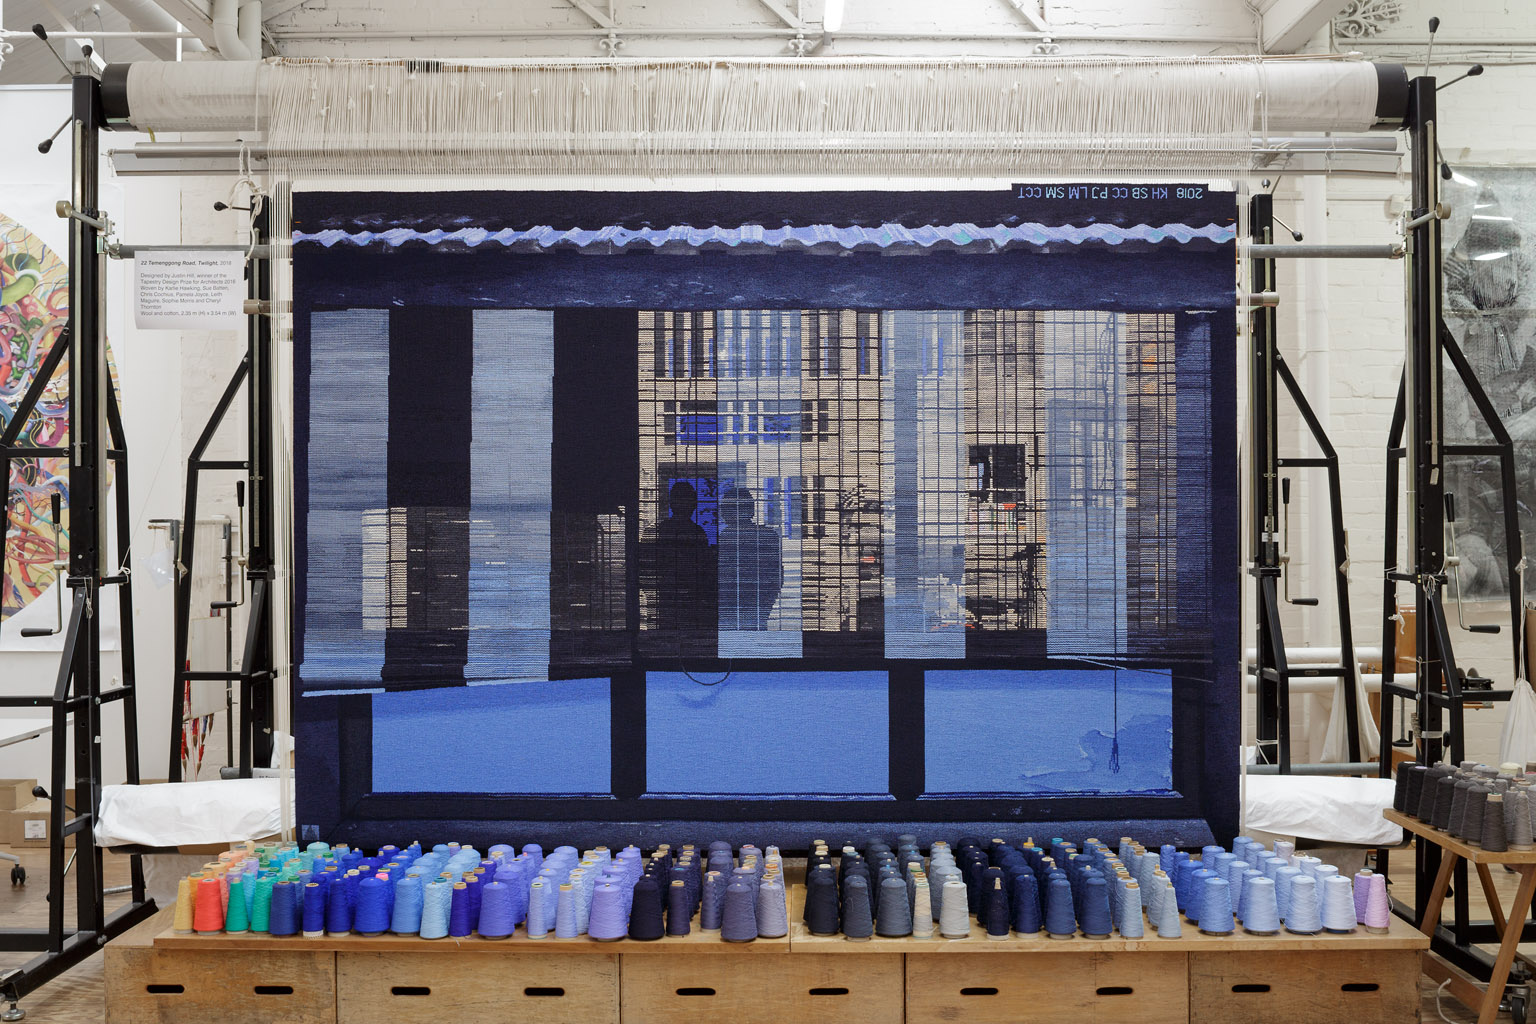 '22 Temenggong Road, Twilight' 2018, designed by Justin Hill and woven by Sue Batten, Chris Cochius, Karlie Hawking, Pamela Joyce, Leith Maguire, Sophie Morris & Cheryl Thornton.